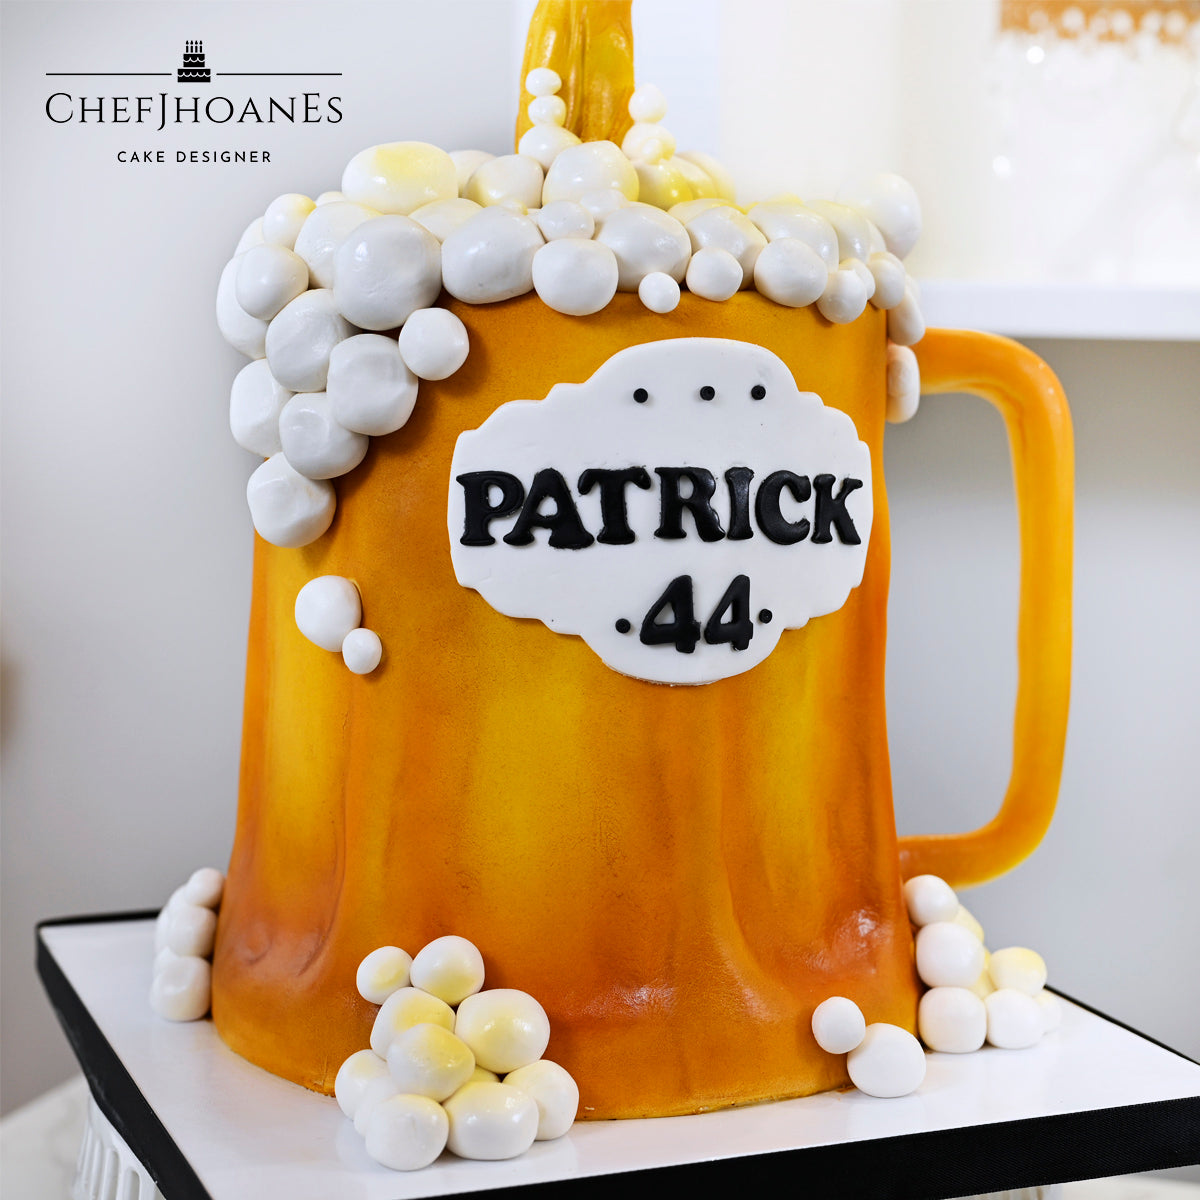 Beer glass cake. Feed 15 people.